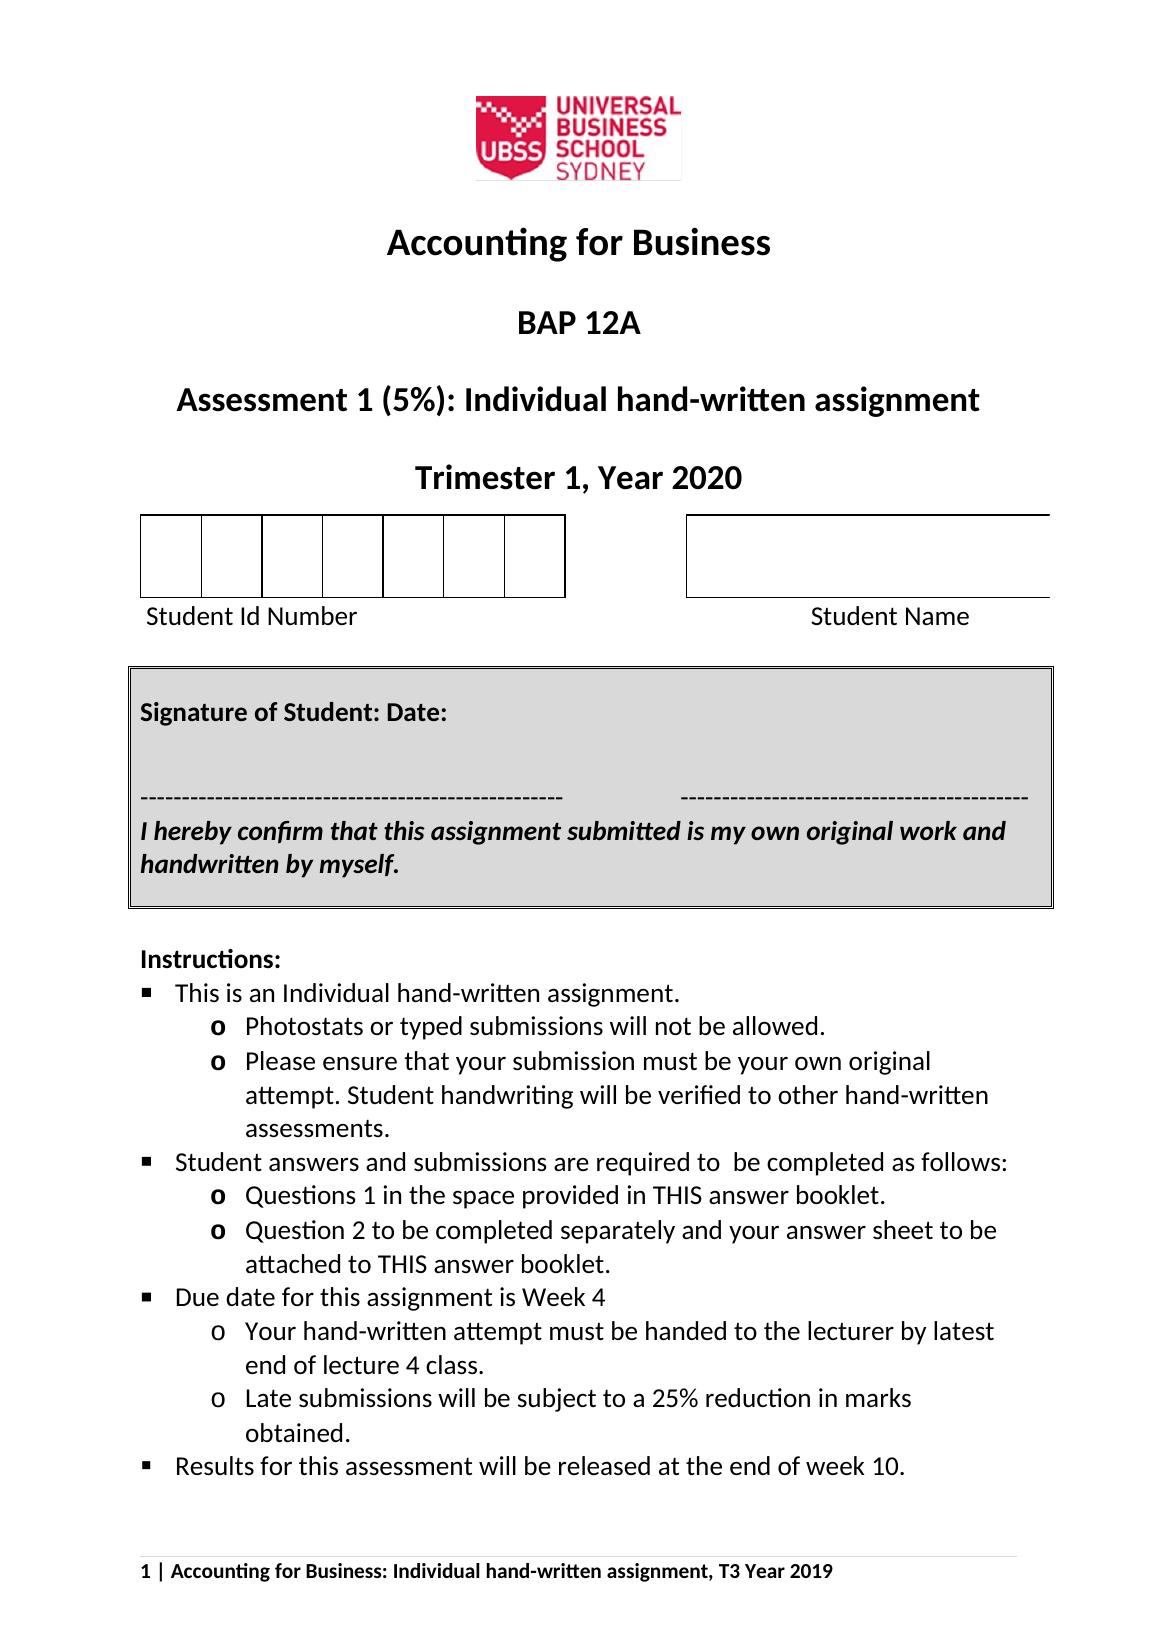 Accounting for Business: Individual Assignment BAP 12A_1